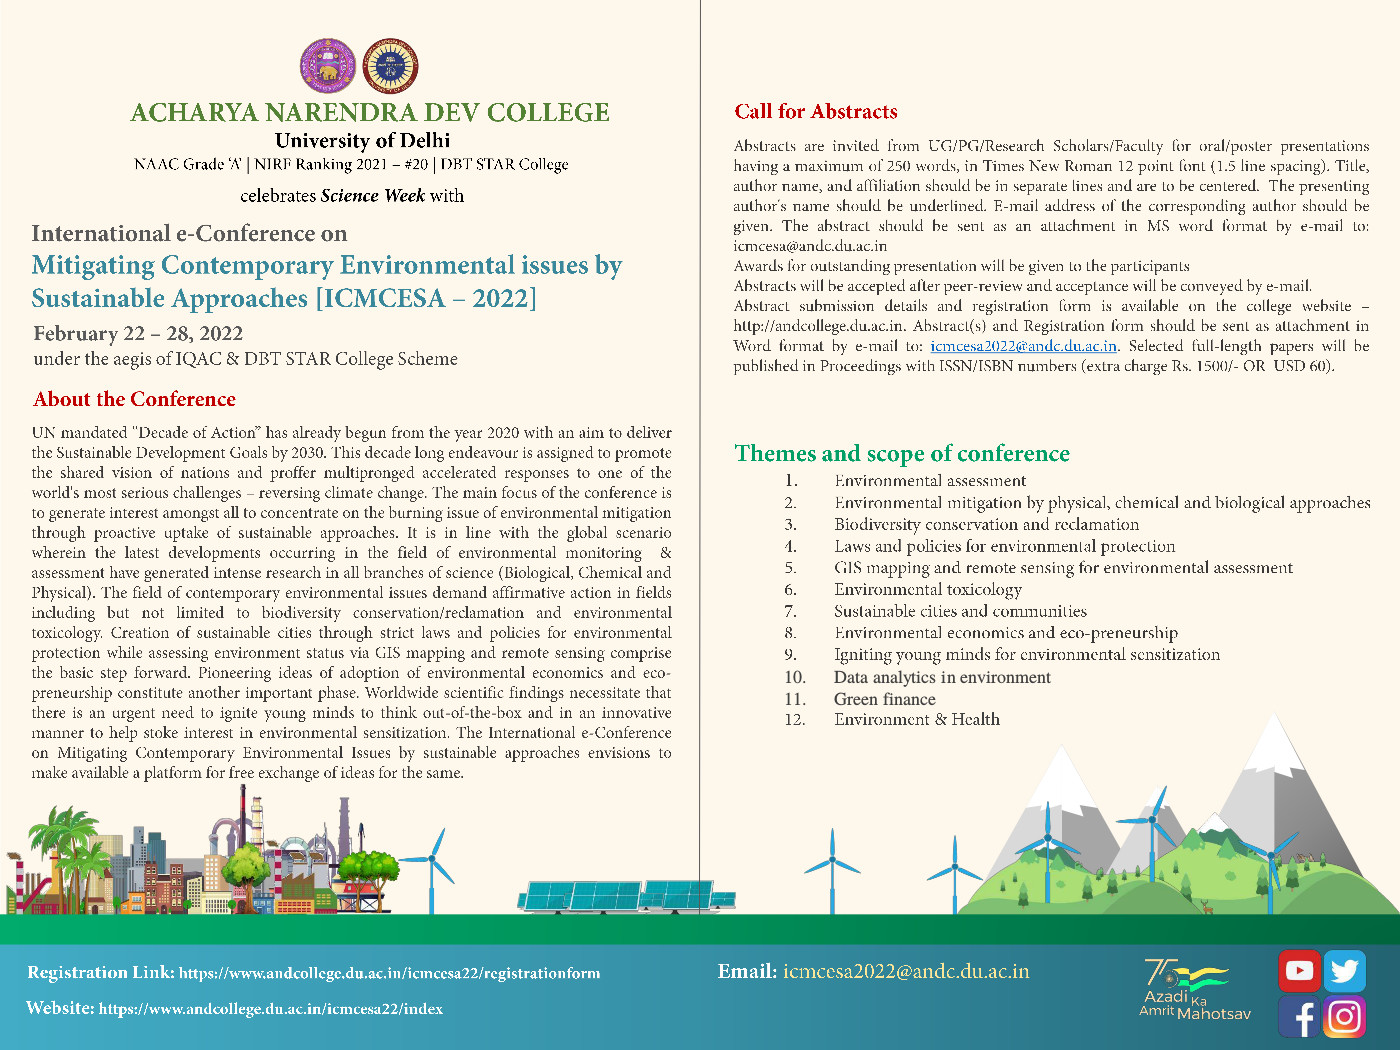 International  e-conference : Mitigating Contemporary Environmental issues by Sustainable Approaches[ICMCESA 2022]